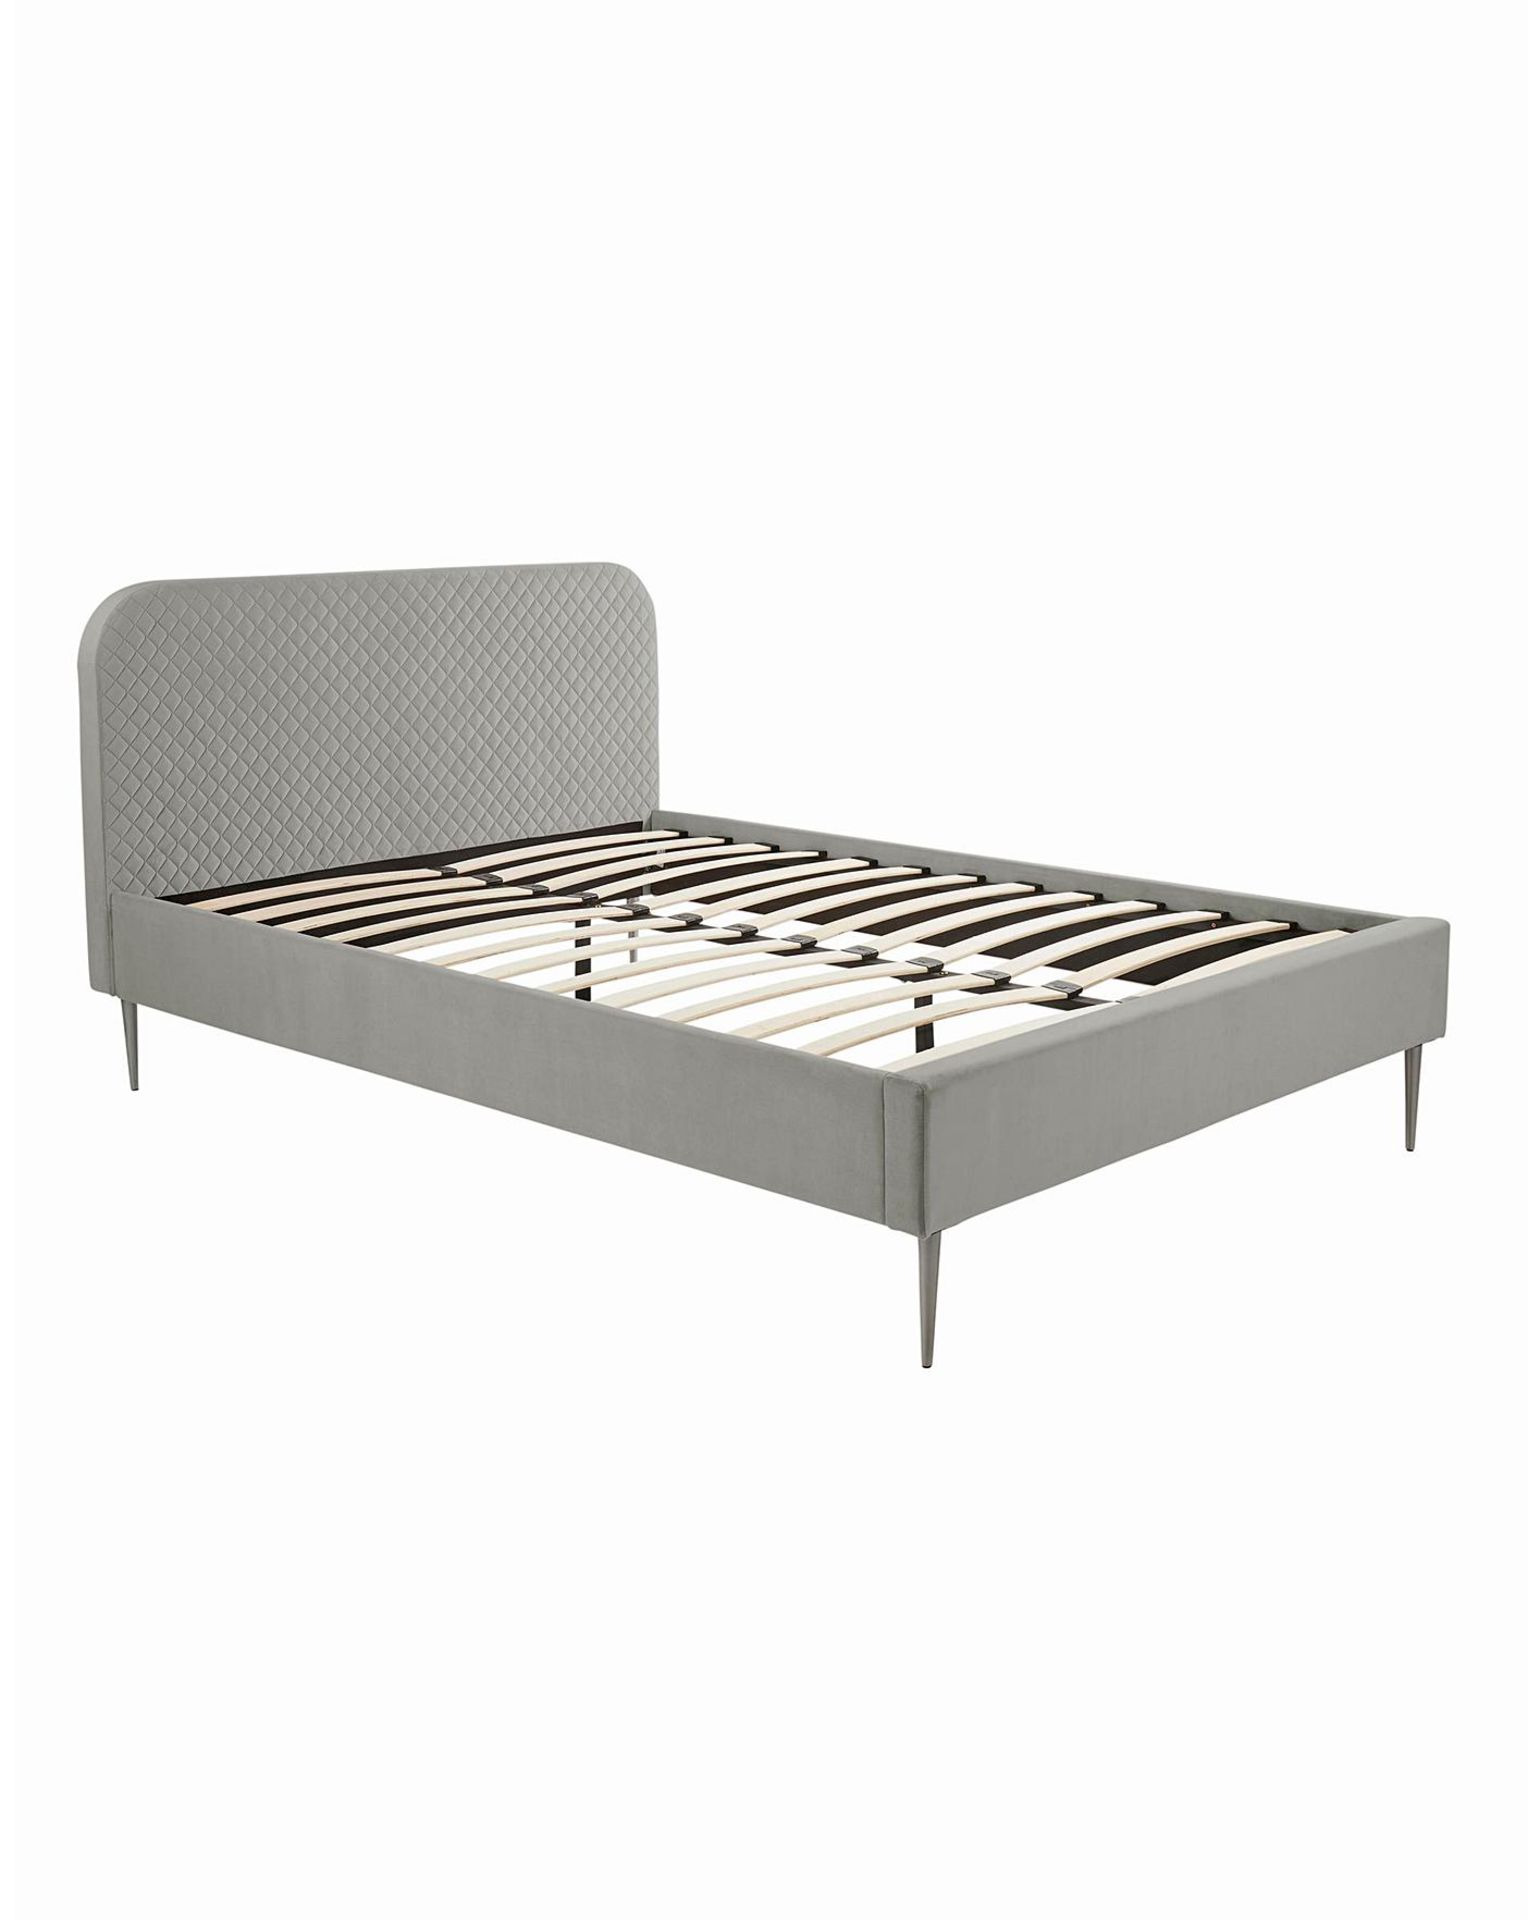 BRAND NEW ARDEN Quilted KINGSIZE Bed Frame. PEWTER. RRP £339 EACH. The Arden Quilted Bed is the - Image 2 of 2